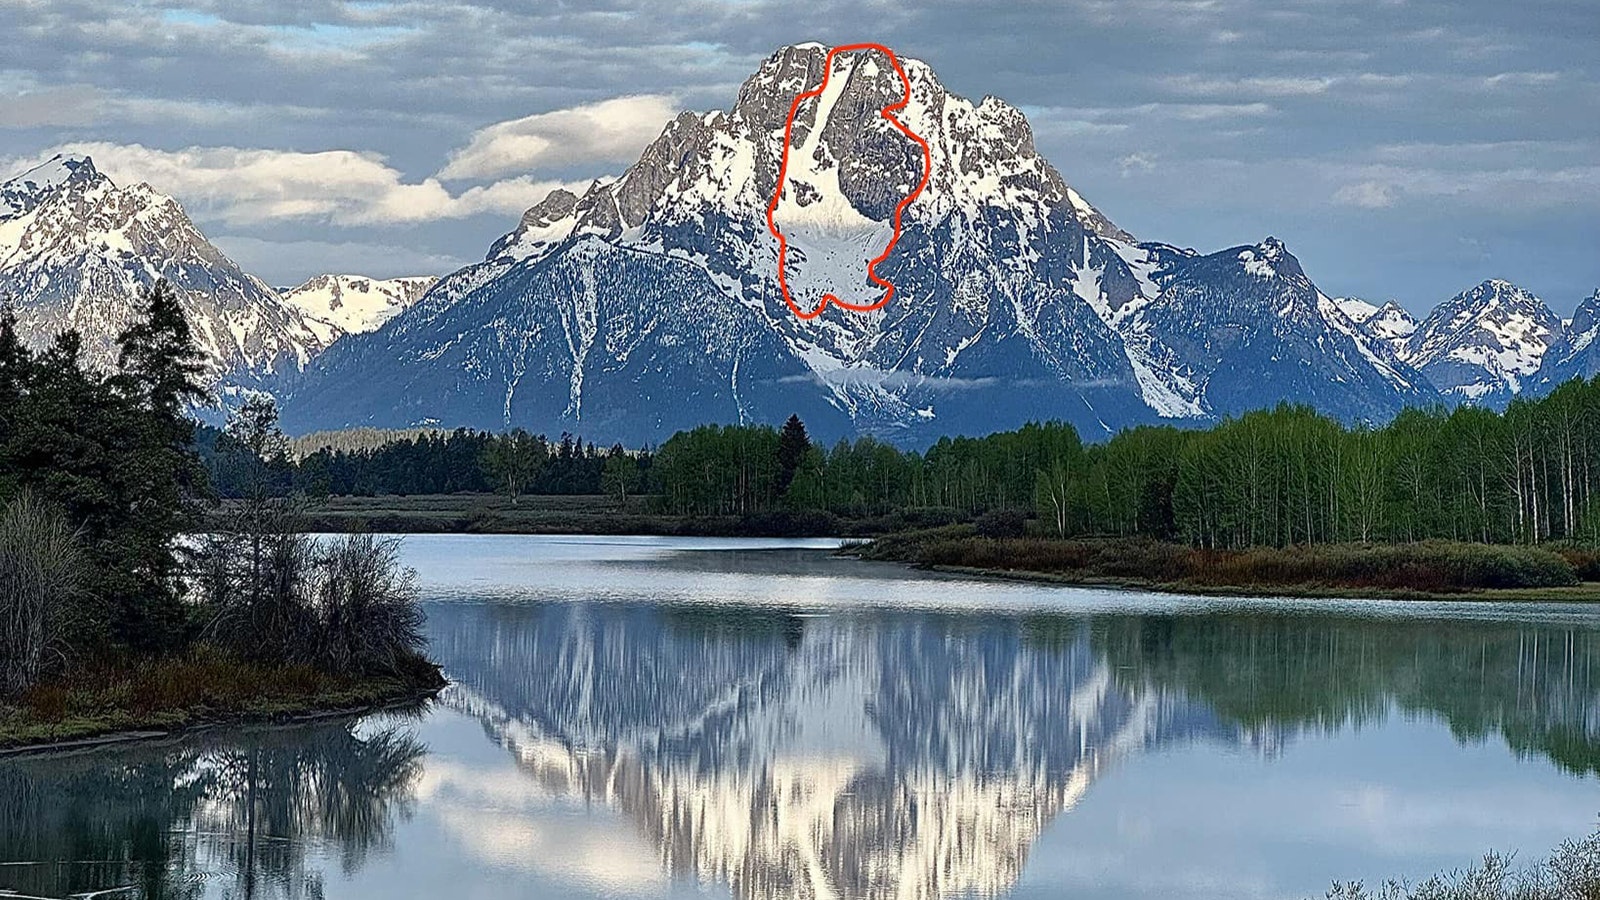 The Lady of Mount Moran has made an appearance this year as snow melts off the Grand Teton peak.